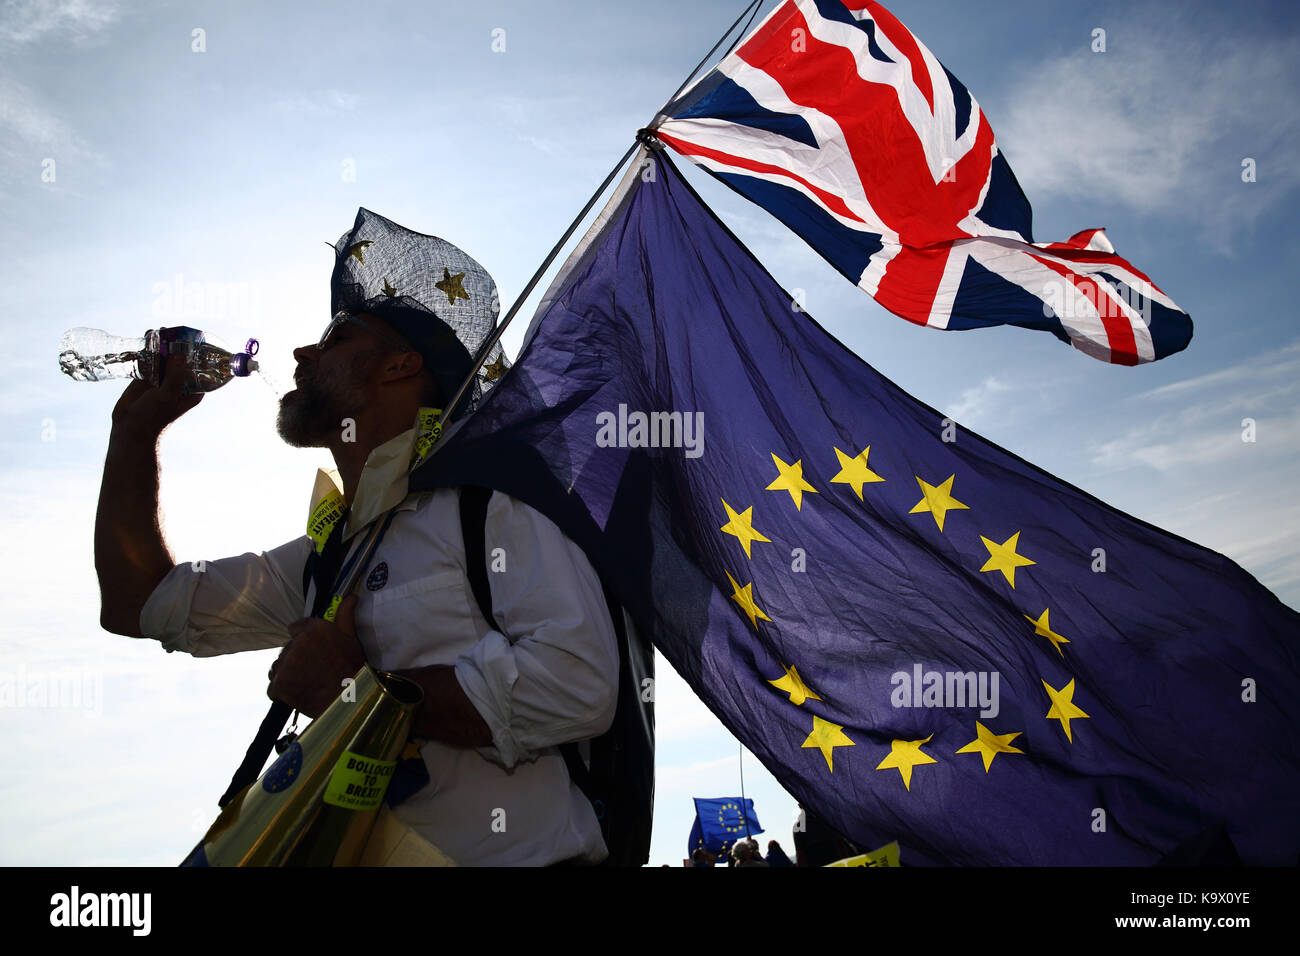 Brighton, UK. 24th September, 2017. A pro European Union supporter drinks water whilst demonstrating during a protest against Brexit in Brighton, UK, Sunday, September 24, 2017. Protesters rallied outside the annual Labour Party Conference being held in Brighton and attended by the opposition leader Jeremy Corbyn. Photograph : Credit: Luke MacGregor/Alamy Live News Stock Photo